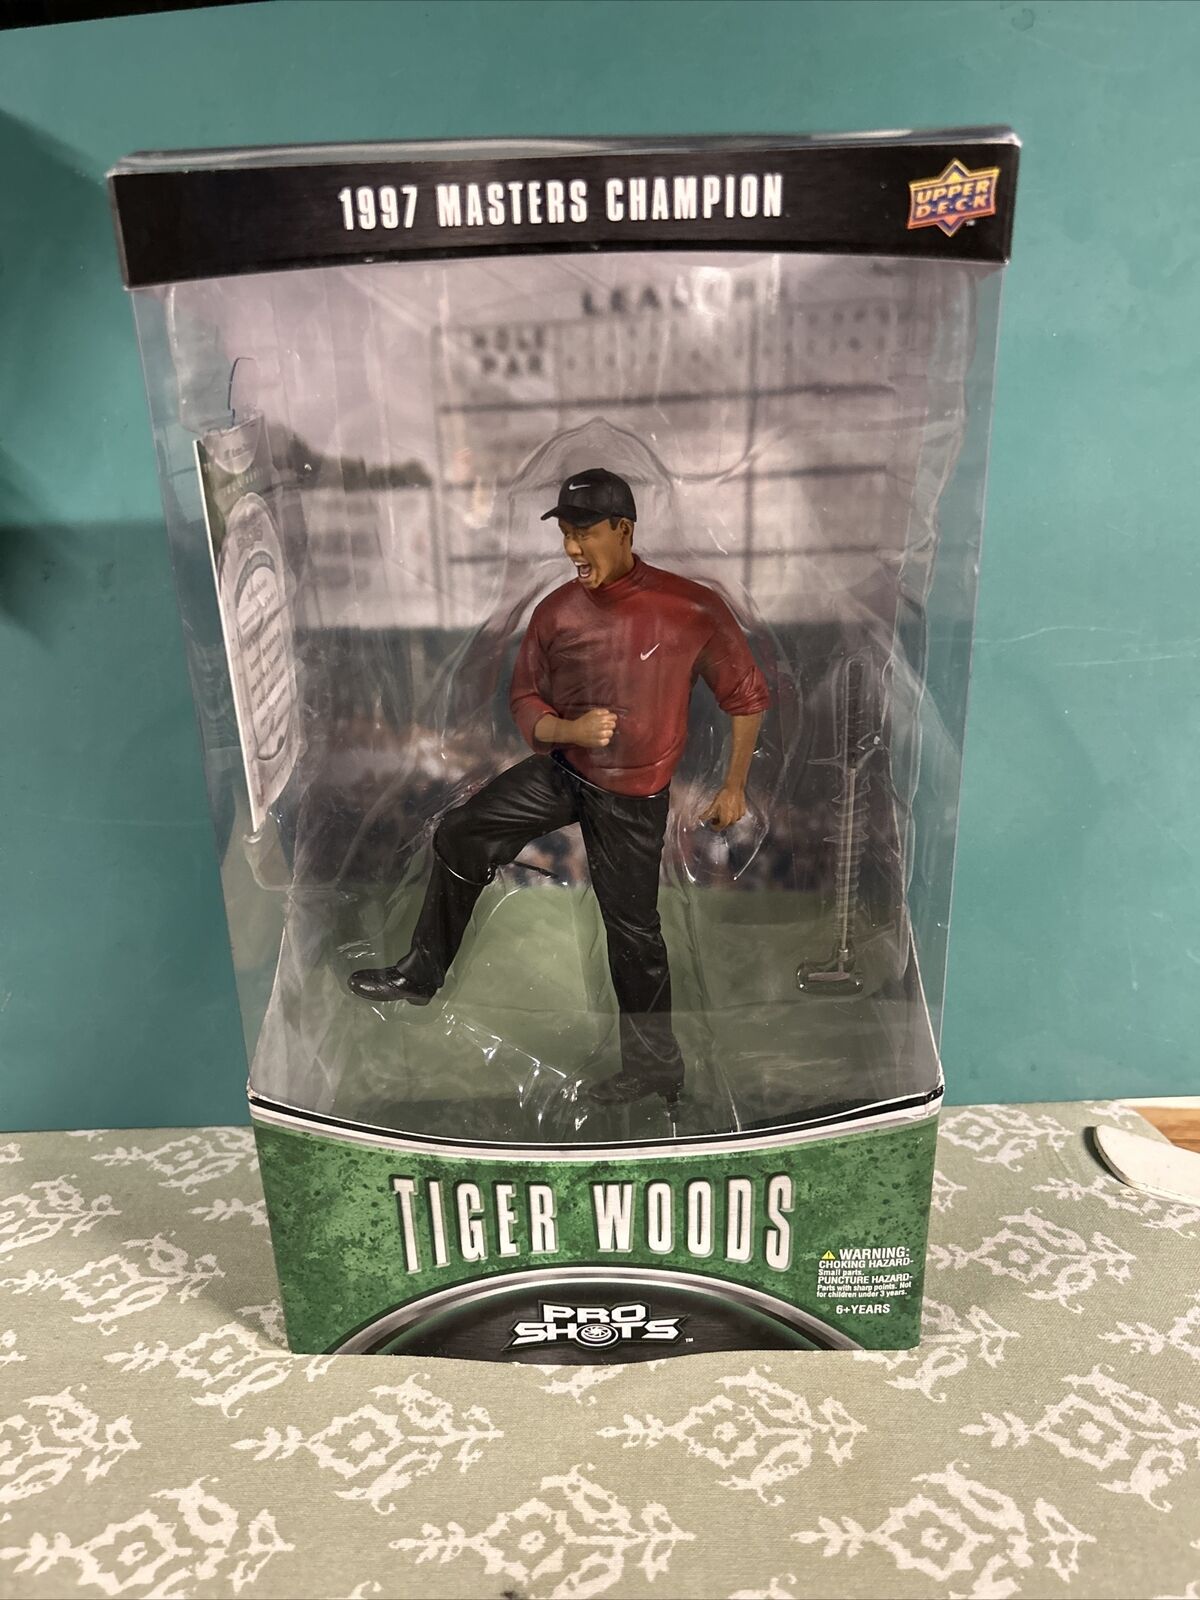 TIGER WOODS 1997 Masters Champion Figure Upper Deck Pro Shots Brand New In Box